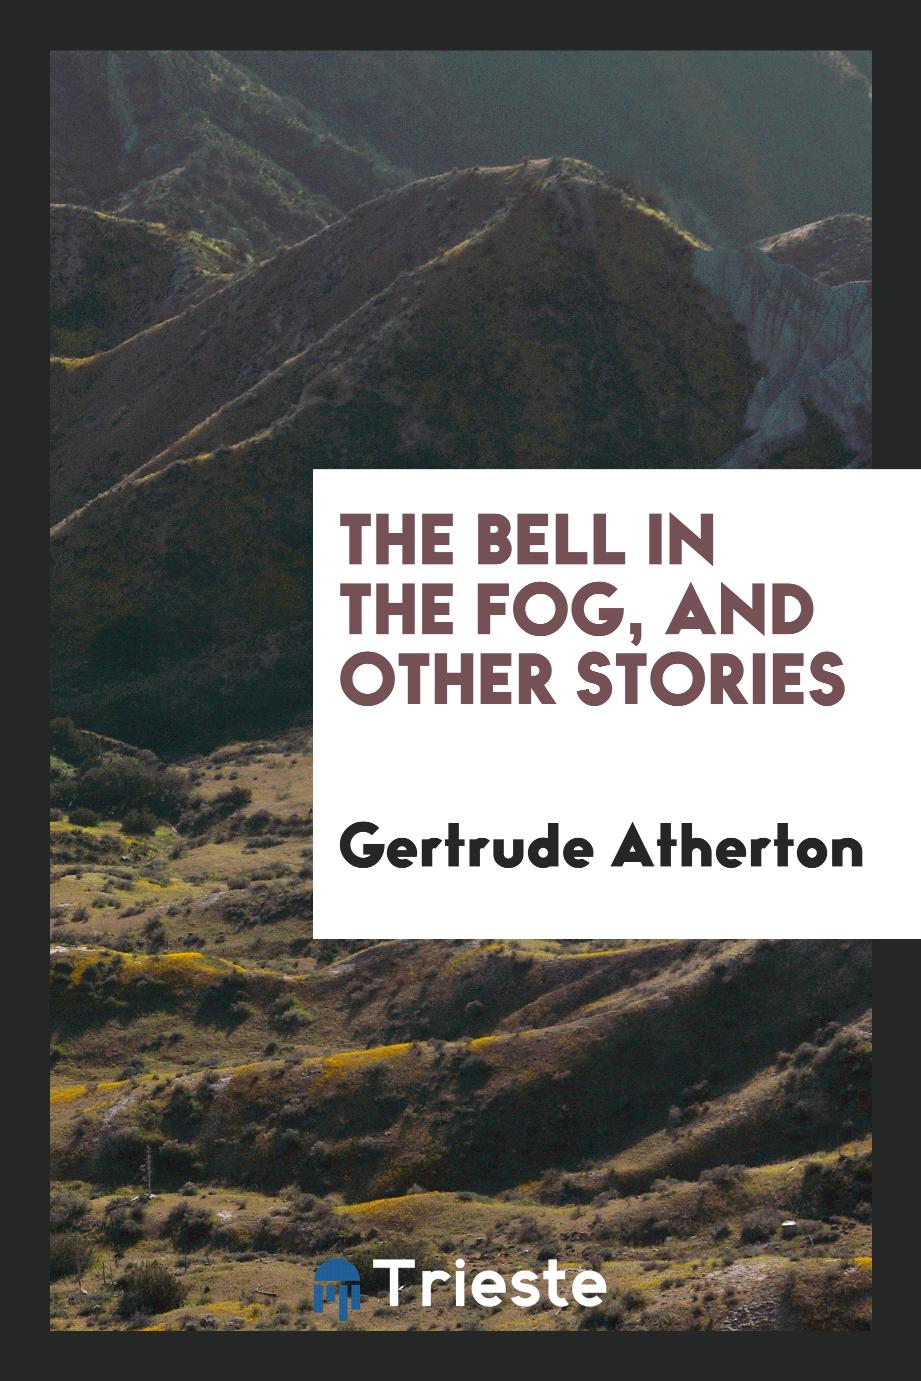 The Bell in the Fog, and Other Stories